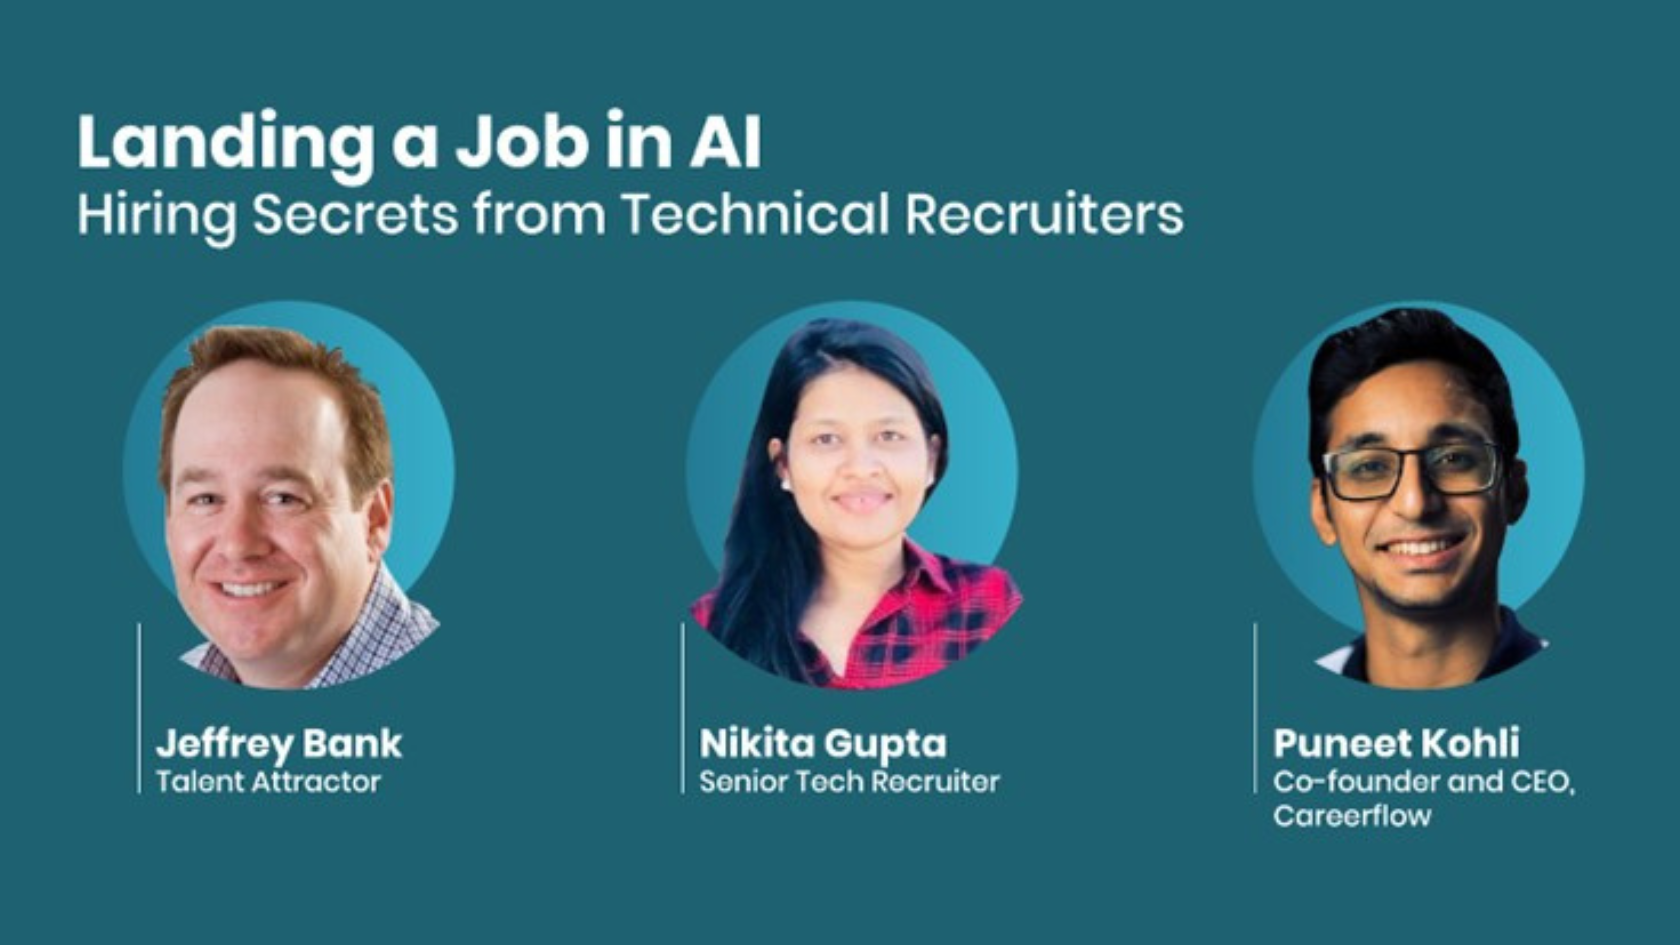 Landing a Job in AI blog article banner ad